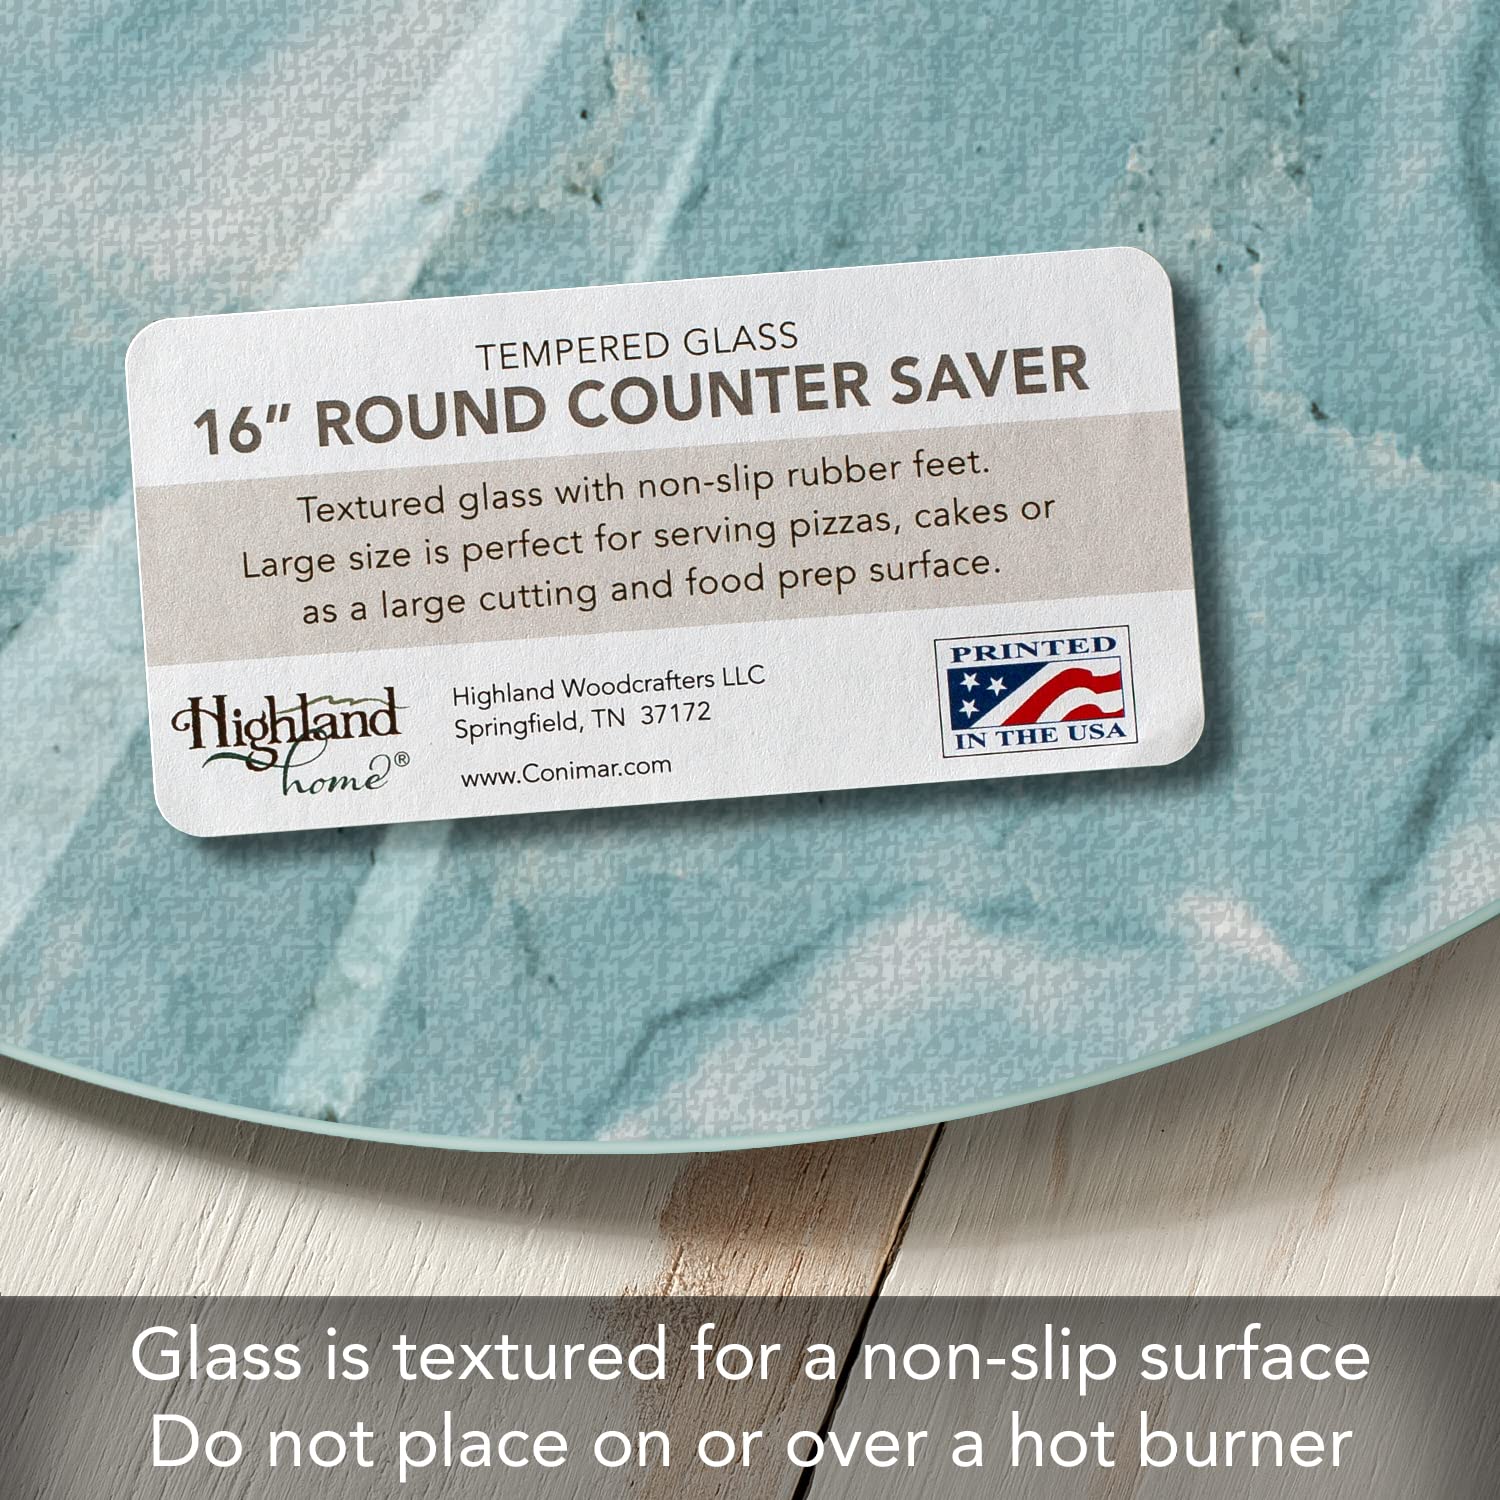 CounterArt Teal Quartz Design 4mm Heat Tolerant Round Tempered Glass Cutting Board 16" Round Manufactured in the USA Food Preparation Board, Cake Plate, Pizza Stand